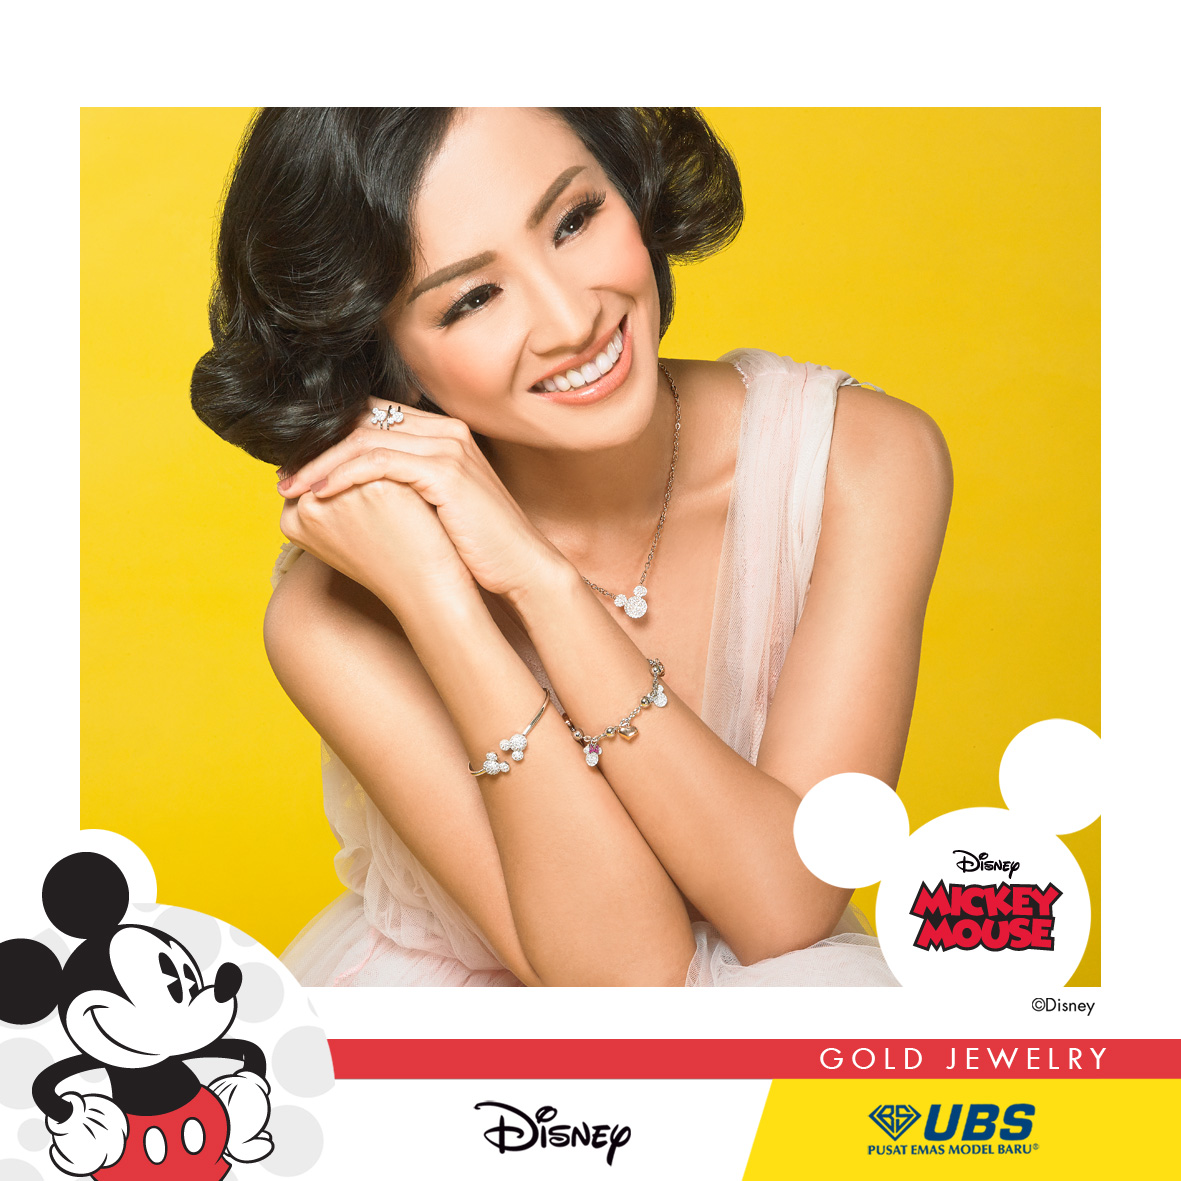 MICKEY MOUSE NECKLACE